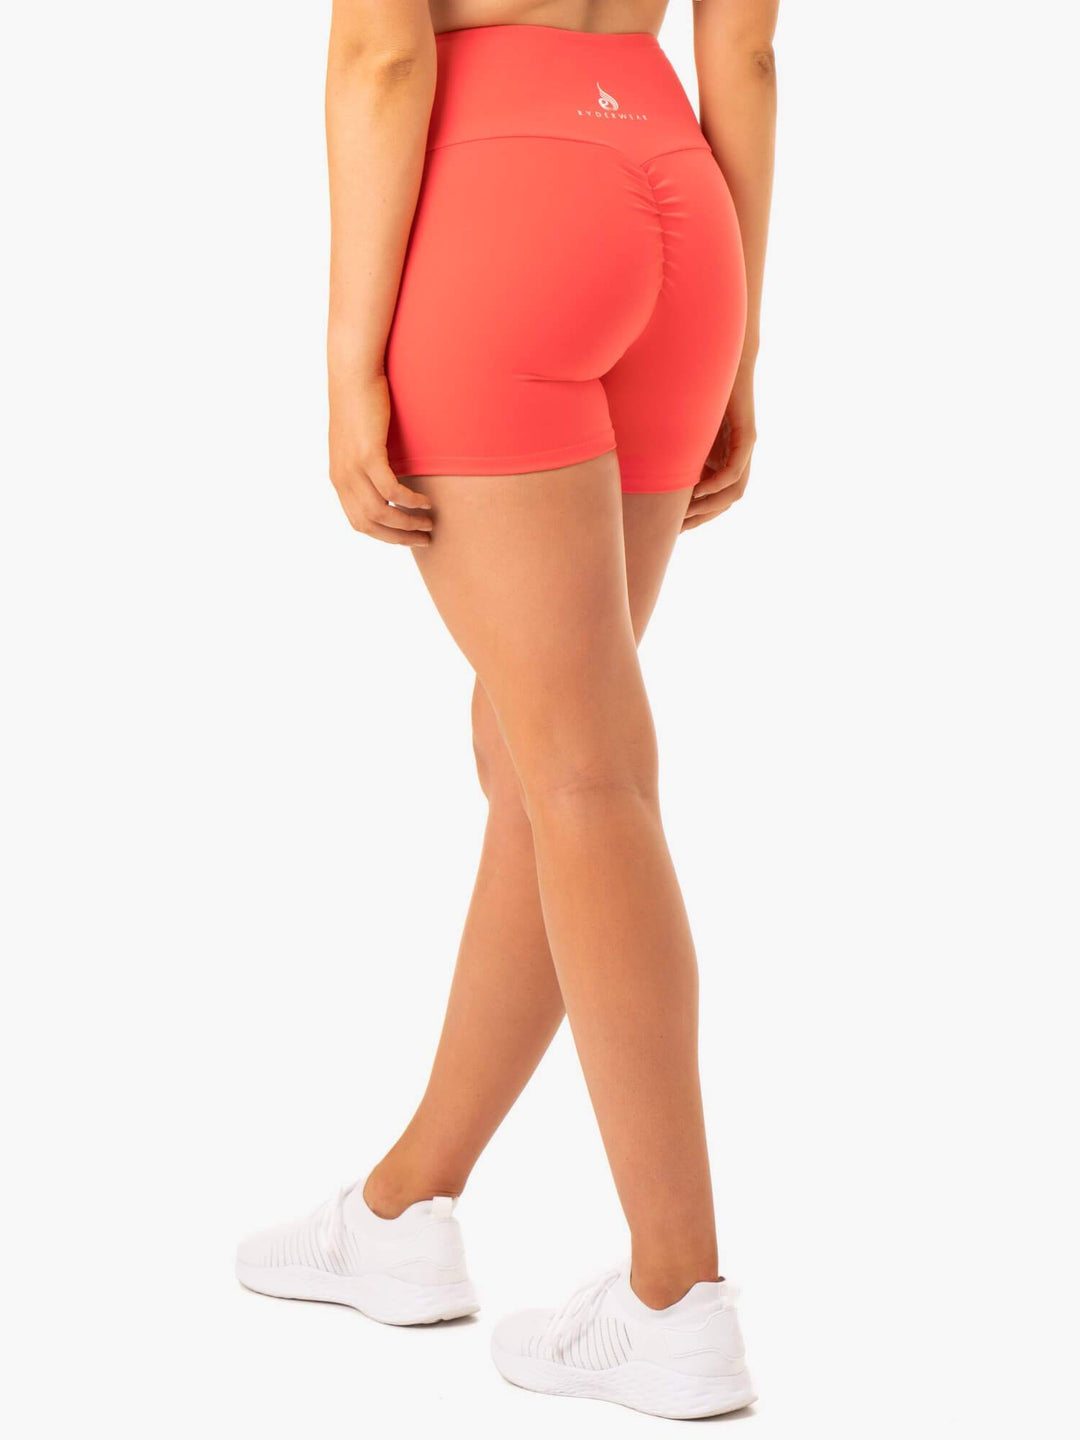 Staples Scrunch Bum Mid Length Shorts - Coral Clothing Ryderwear 